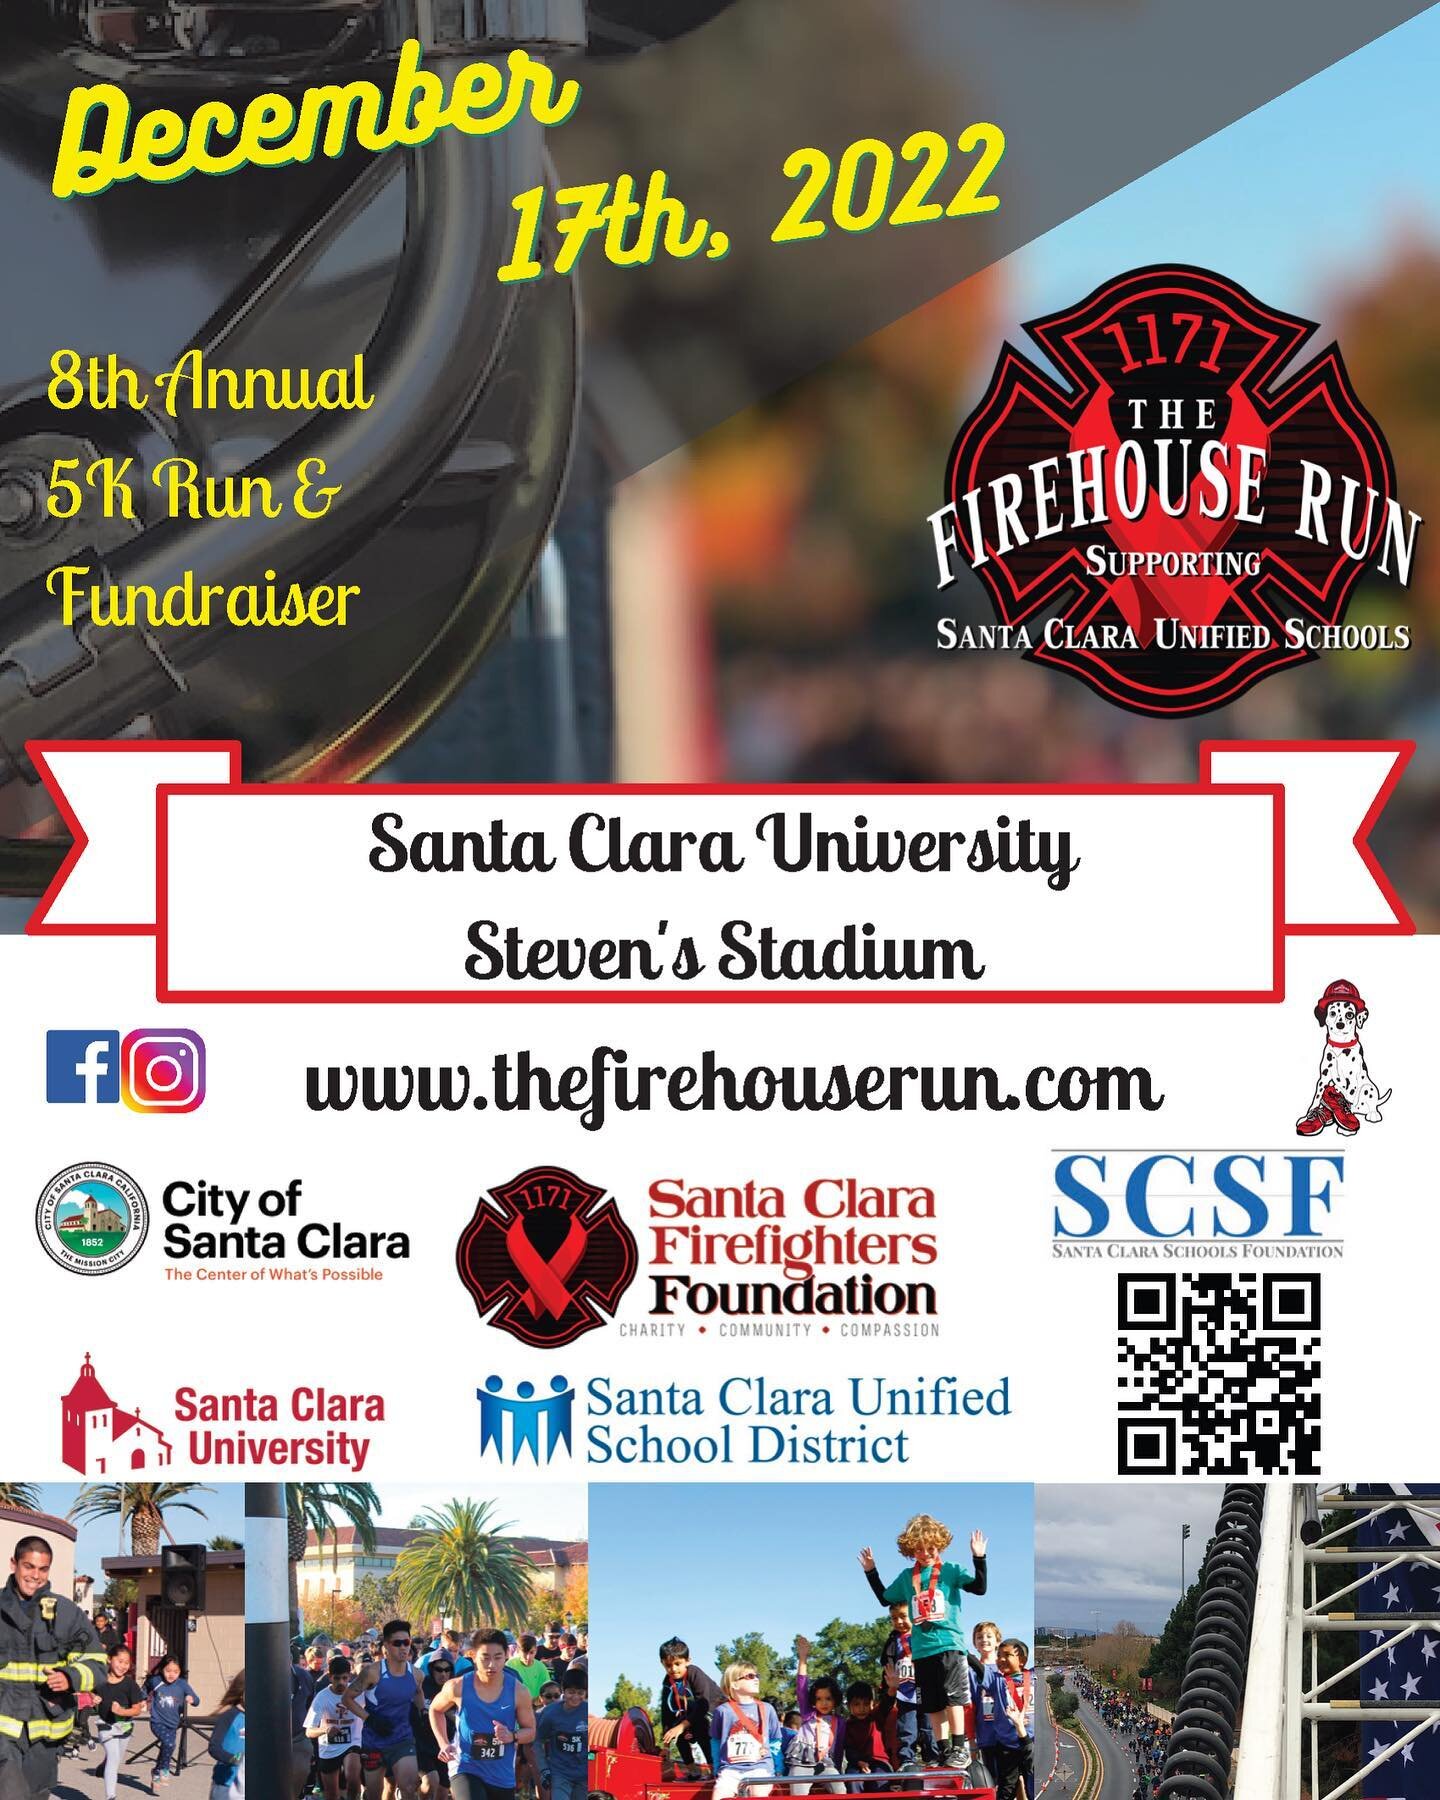 October is fire prevention month! Join us Dec 17 @santaclarauniversity Take 10% off any race registration by using code &ldquo;FIREPREVENTION&rdquo;. Visit www.thefirehouserun.com to register.